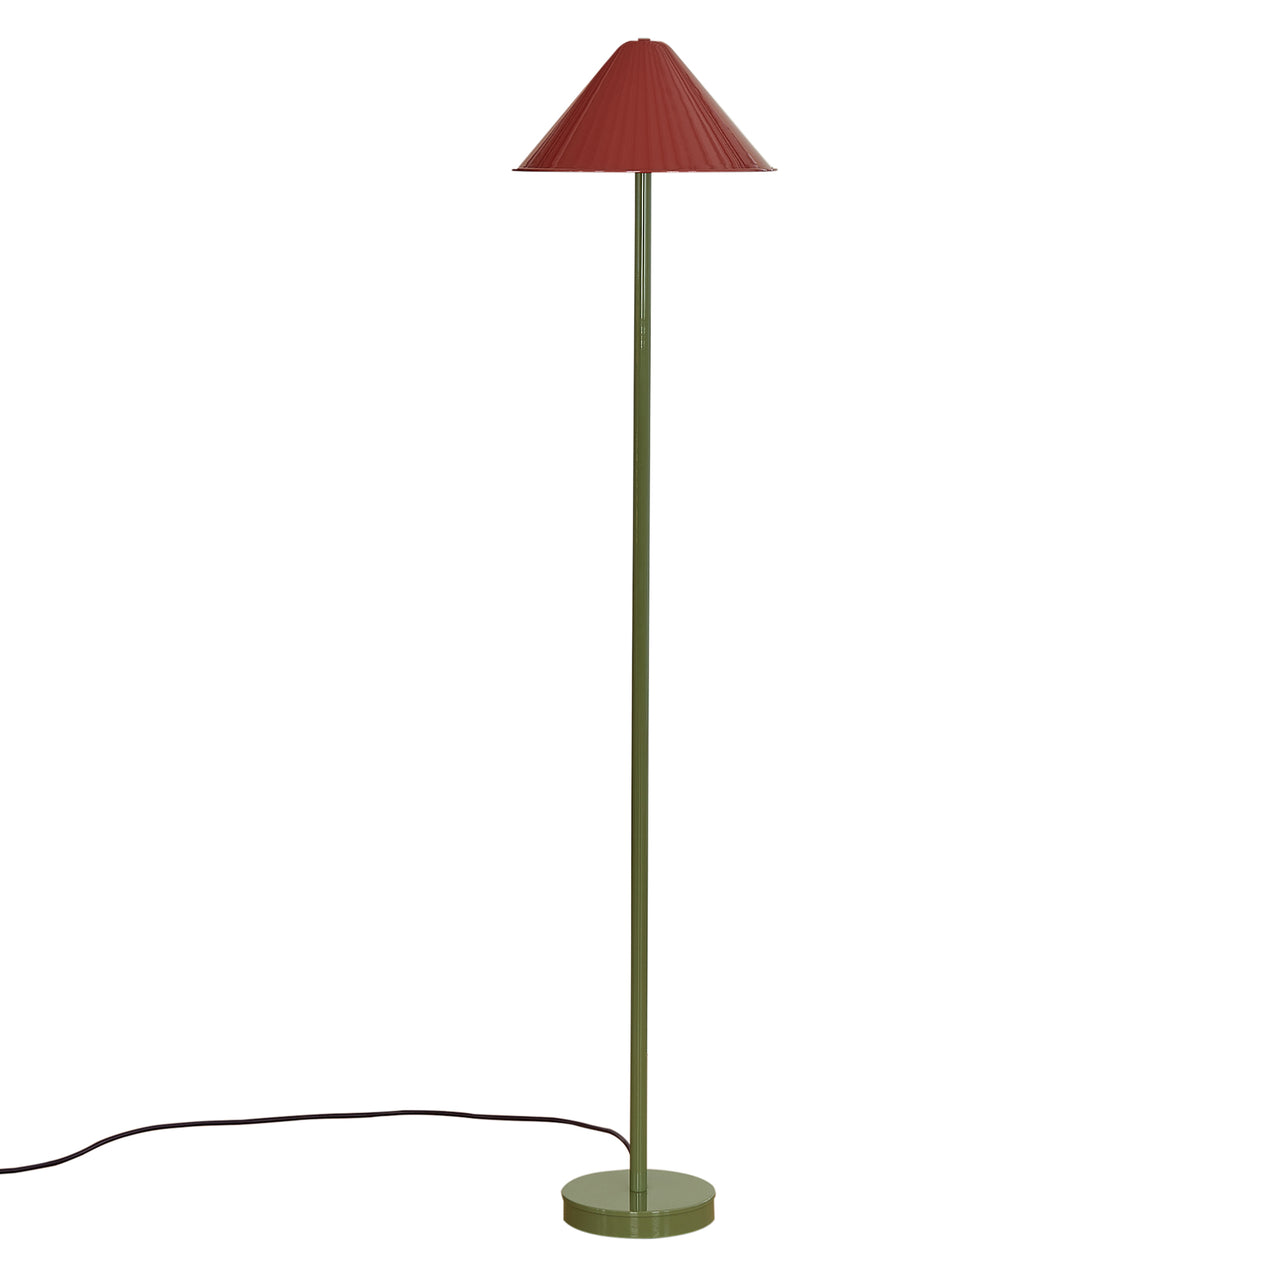 Tipi Floor Lamp: Oxide Red + Reed Green